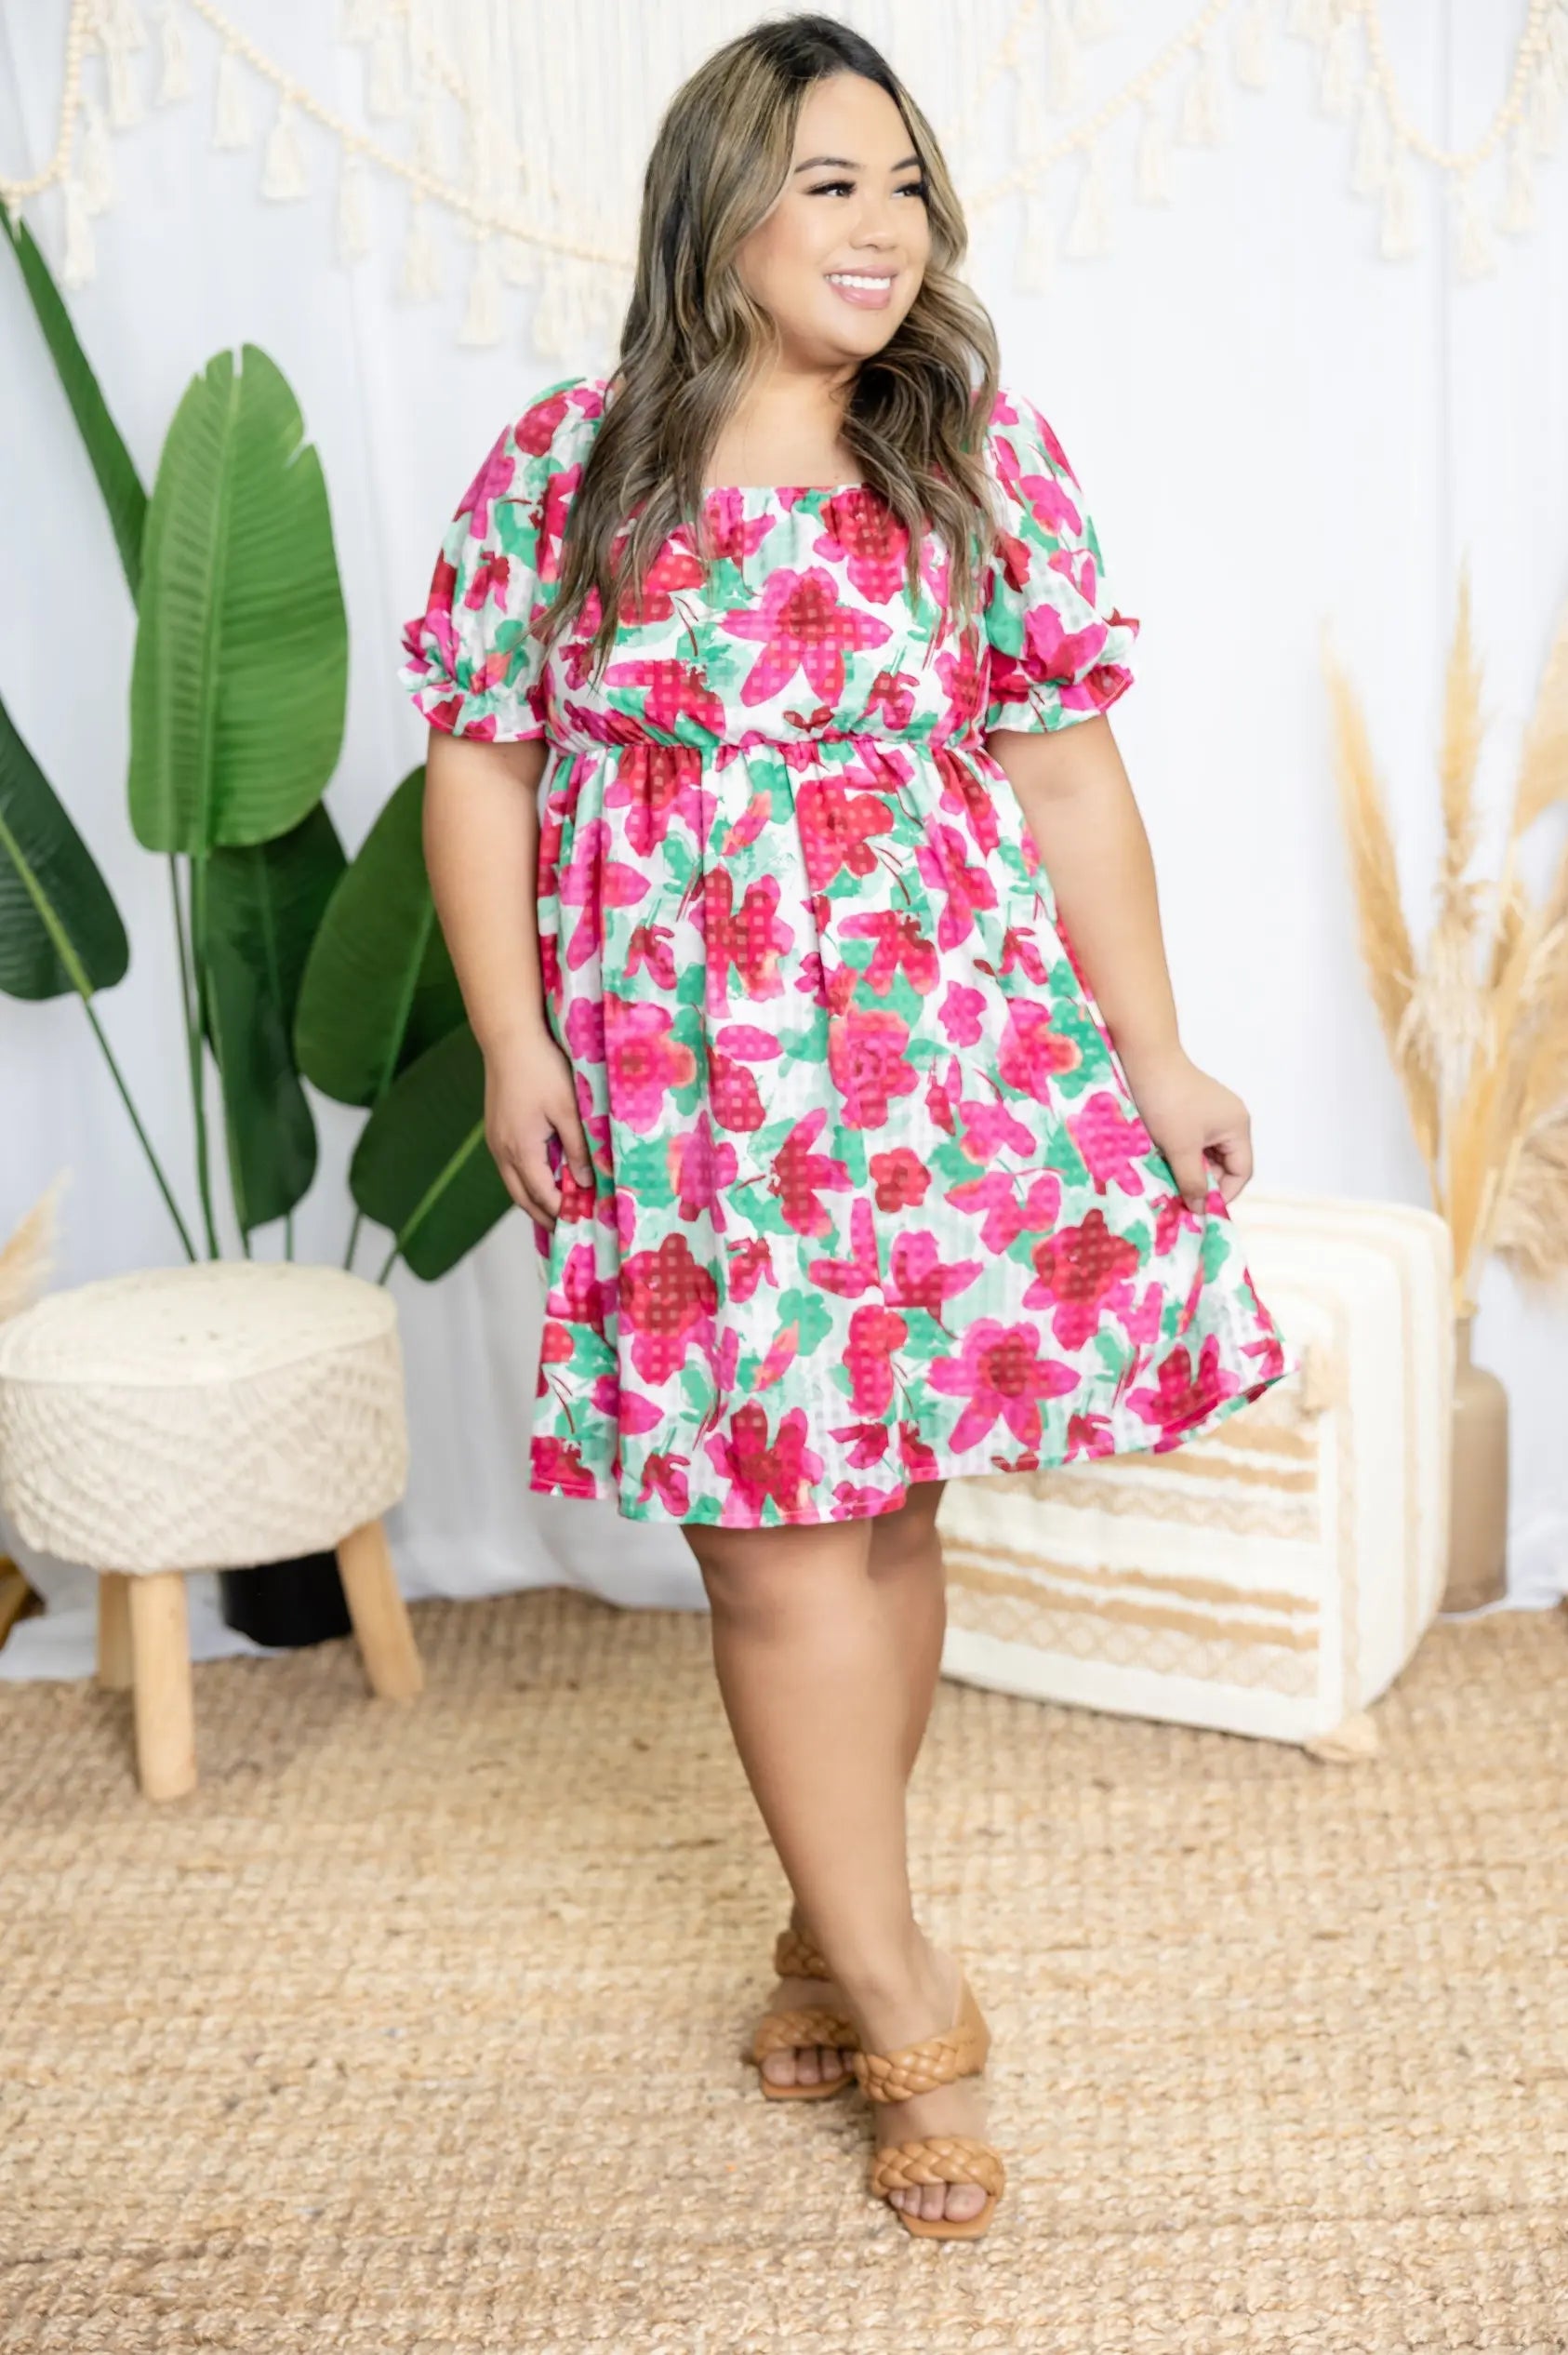 The One That I Need - Dress Boutique Simplified